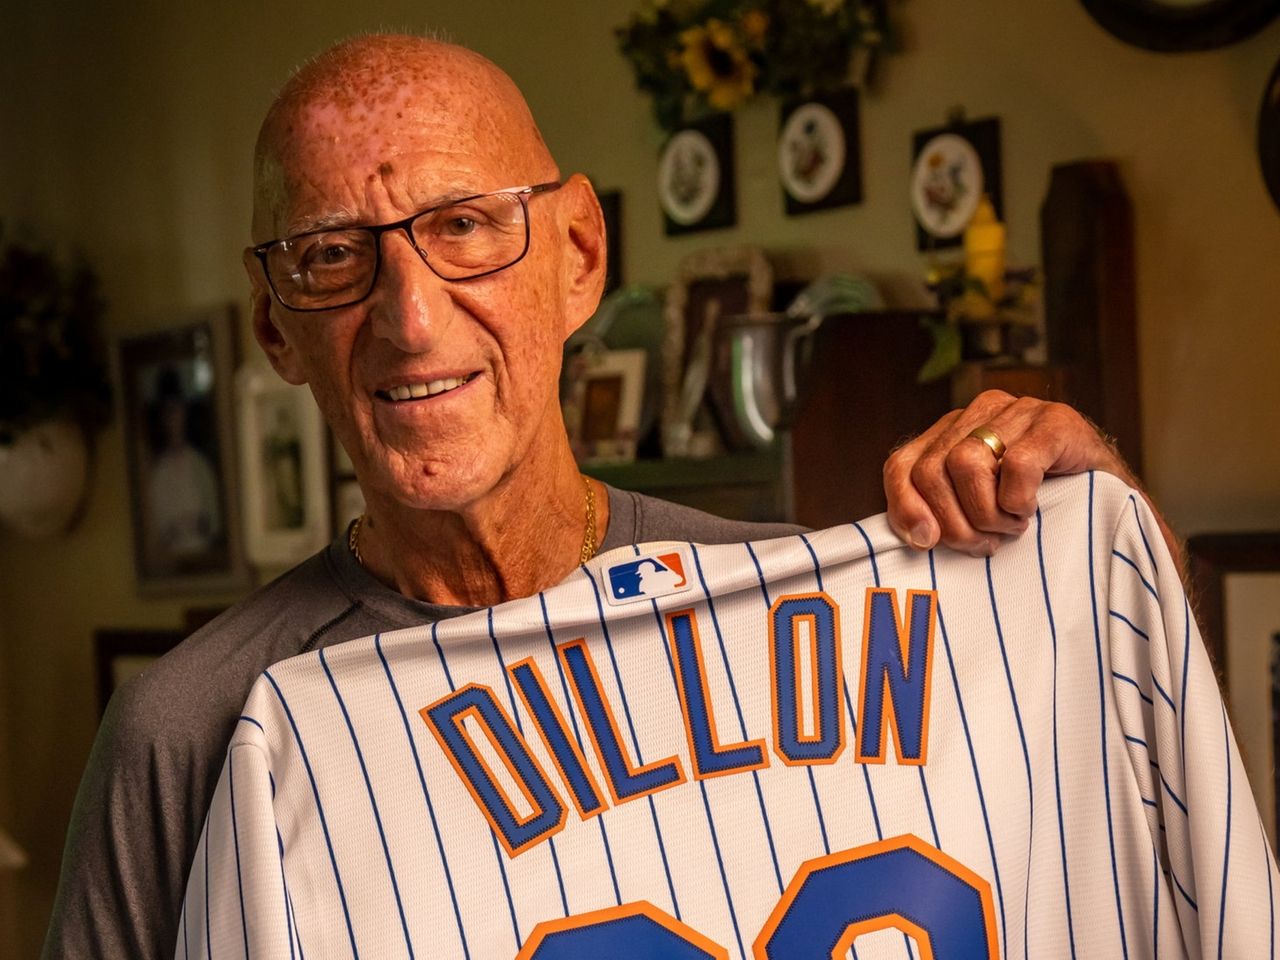 How former Mets pitcher Steve Dillon became an NYPD cop